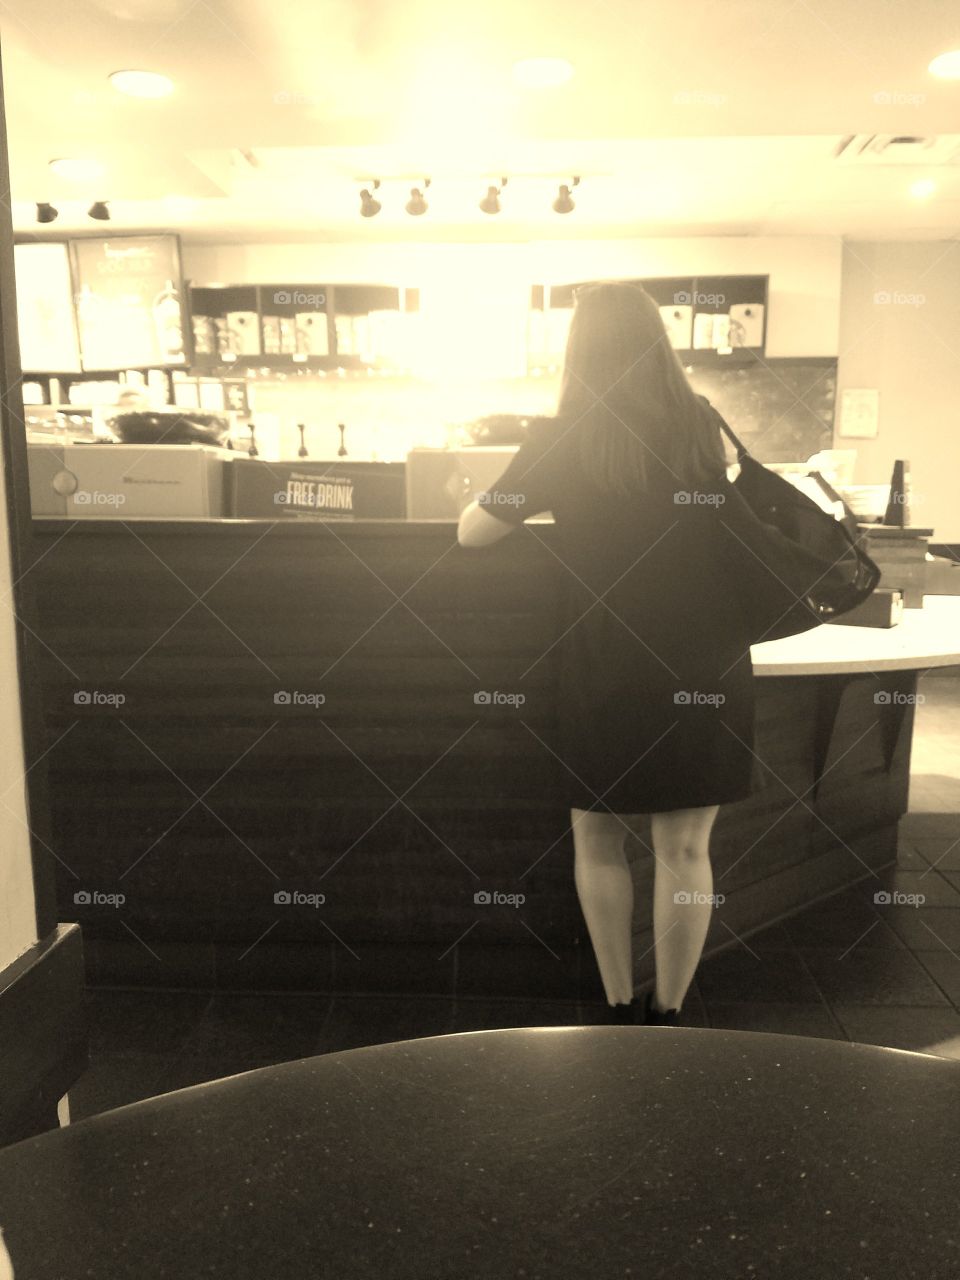 Girl Waiting For Drink at Starbucks in Manhattan. Sepia Filter. Taken on Galaxy S7 Android Phone. June 2017.